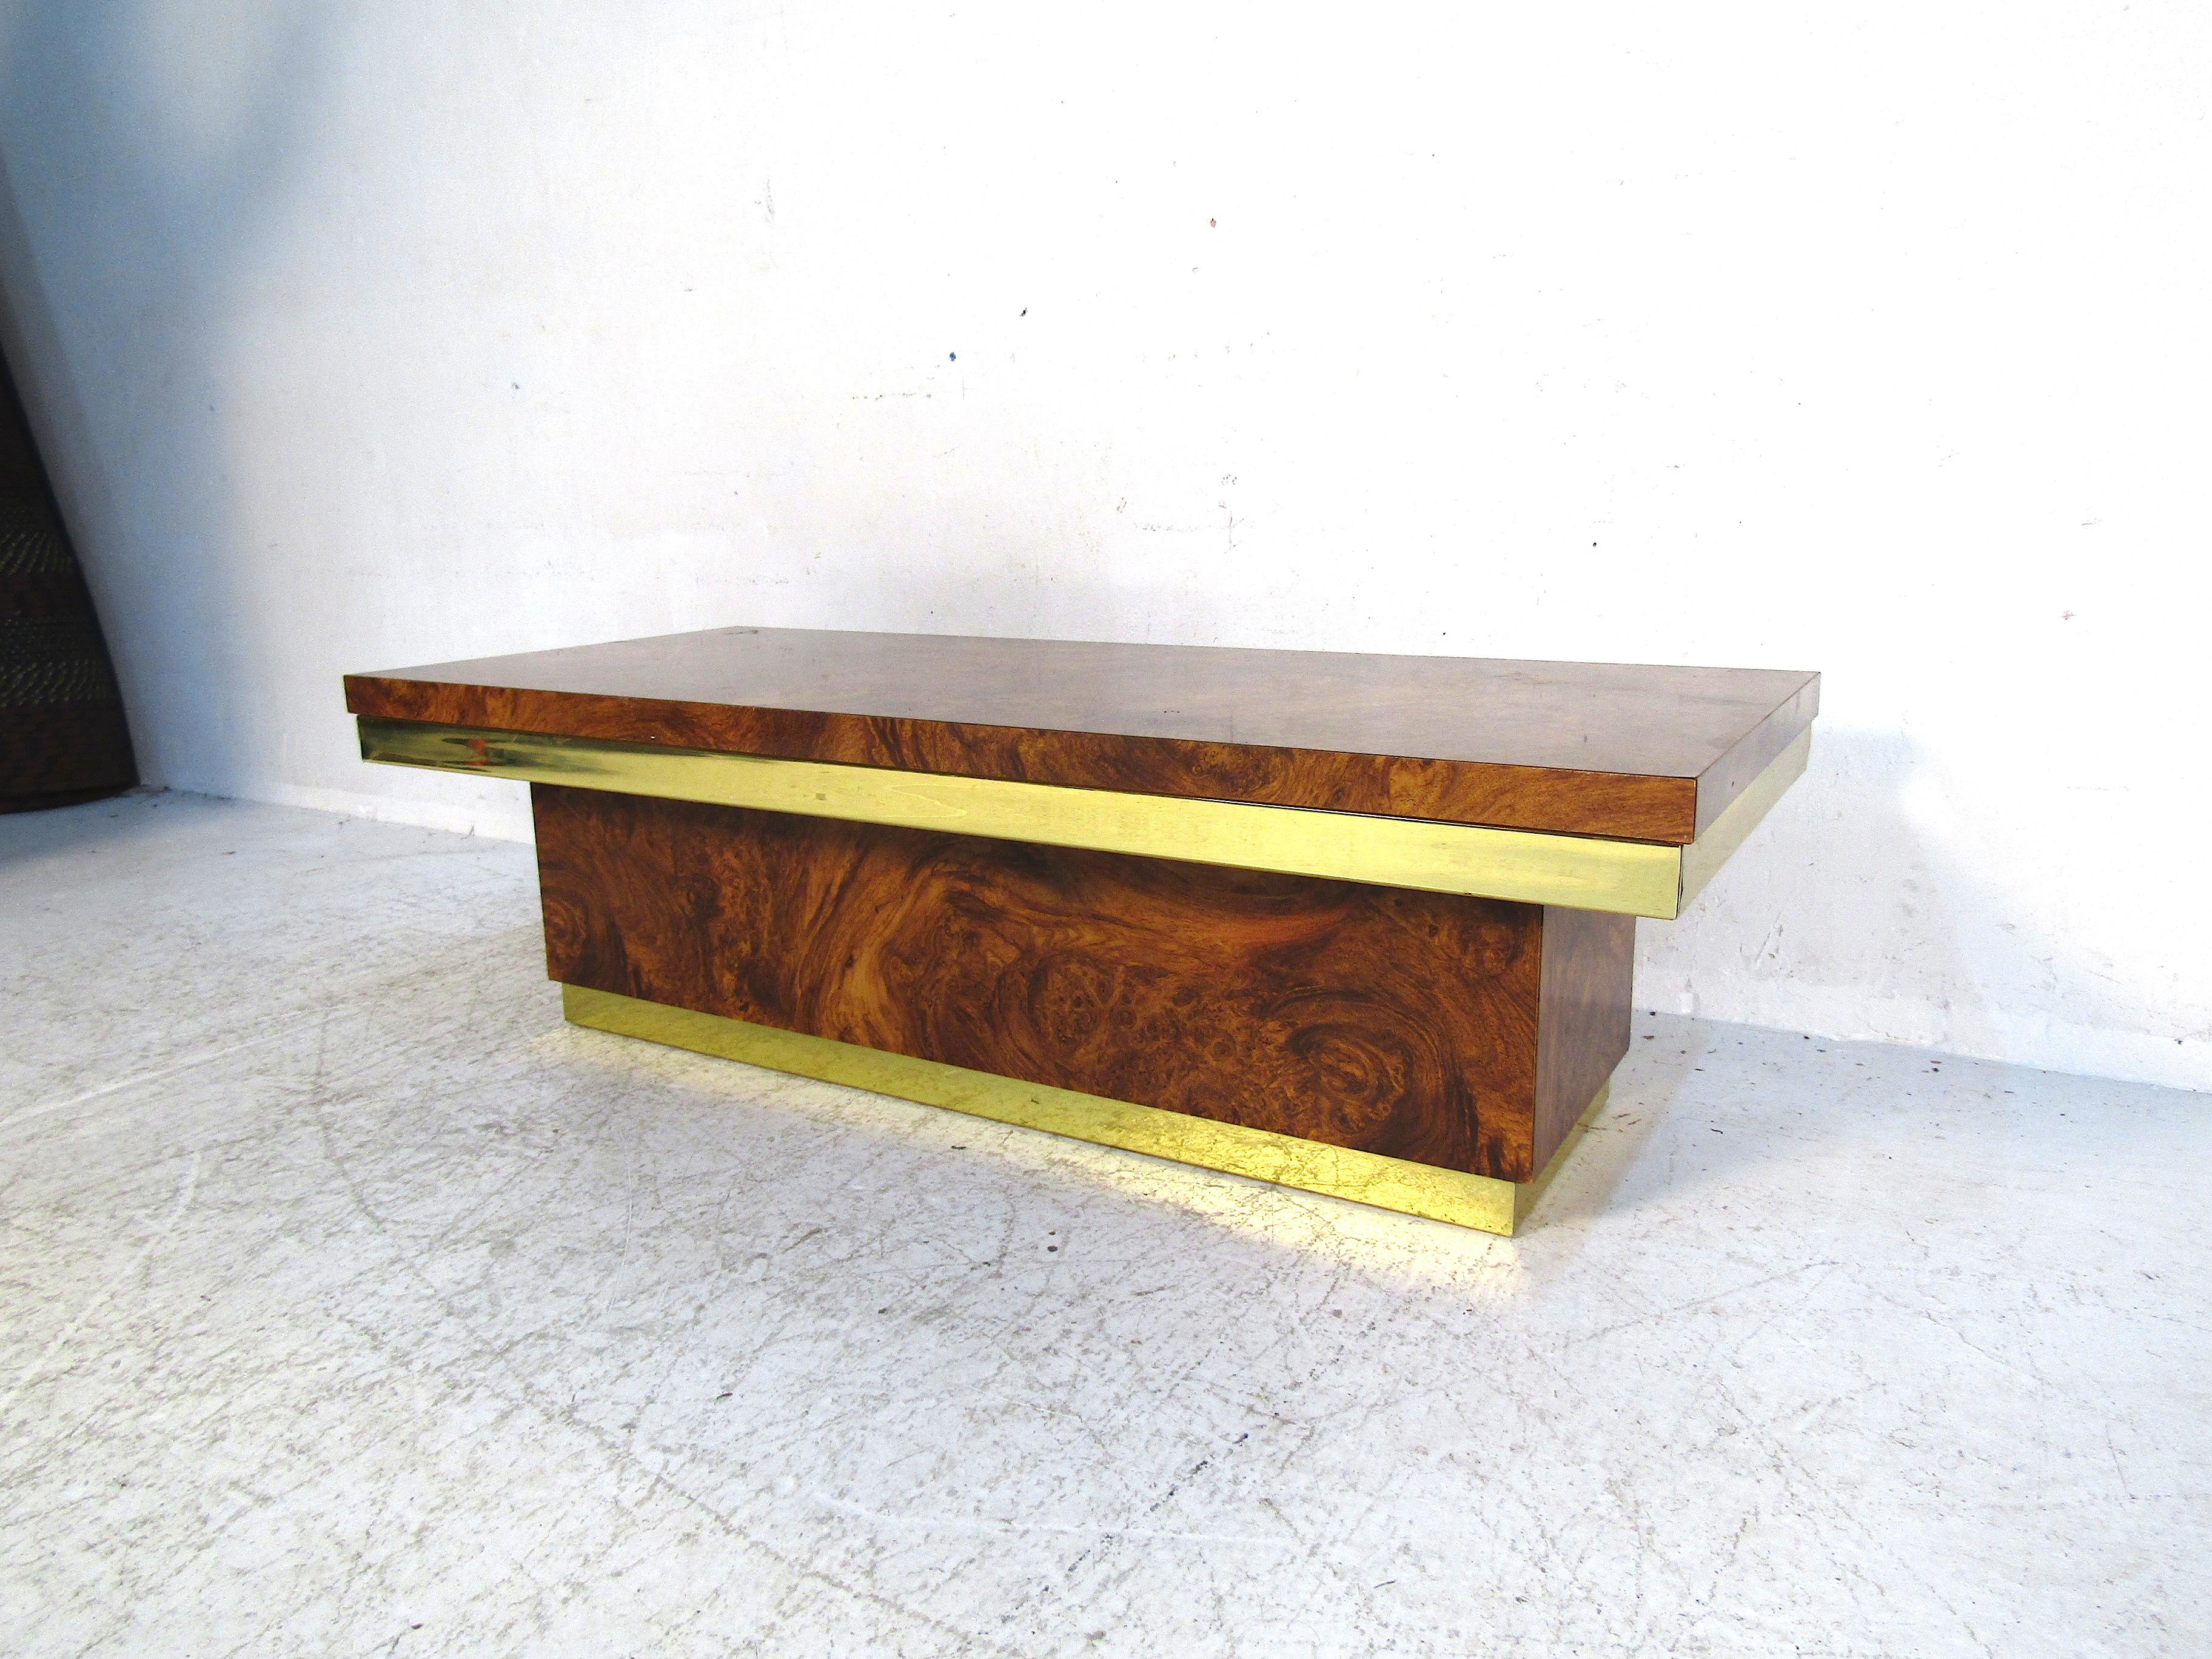 This beautiful midcentury coffee table features stunning burl wood panels and brass accents. This piece will fit perfectly in any contemporary or midcentury style space. Eye-catching this table will be sure to be a conversation piece for years to